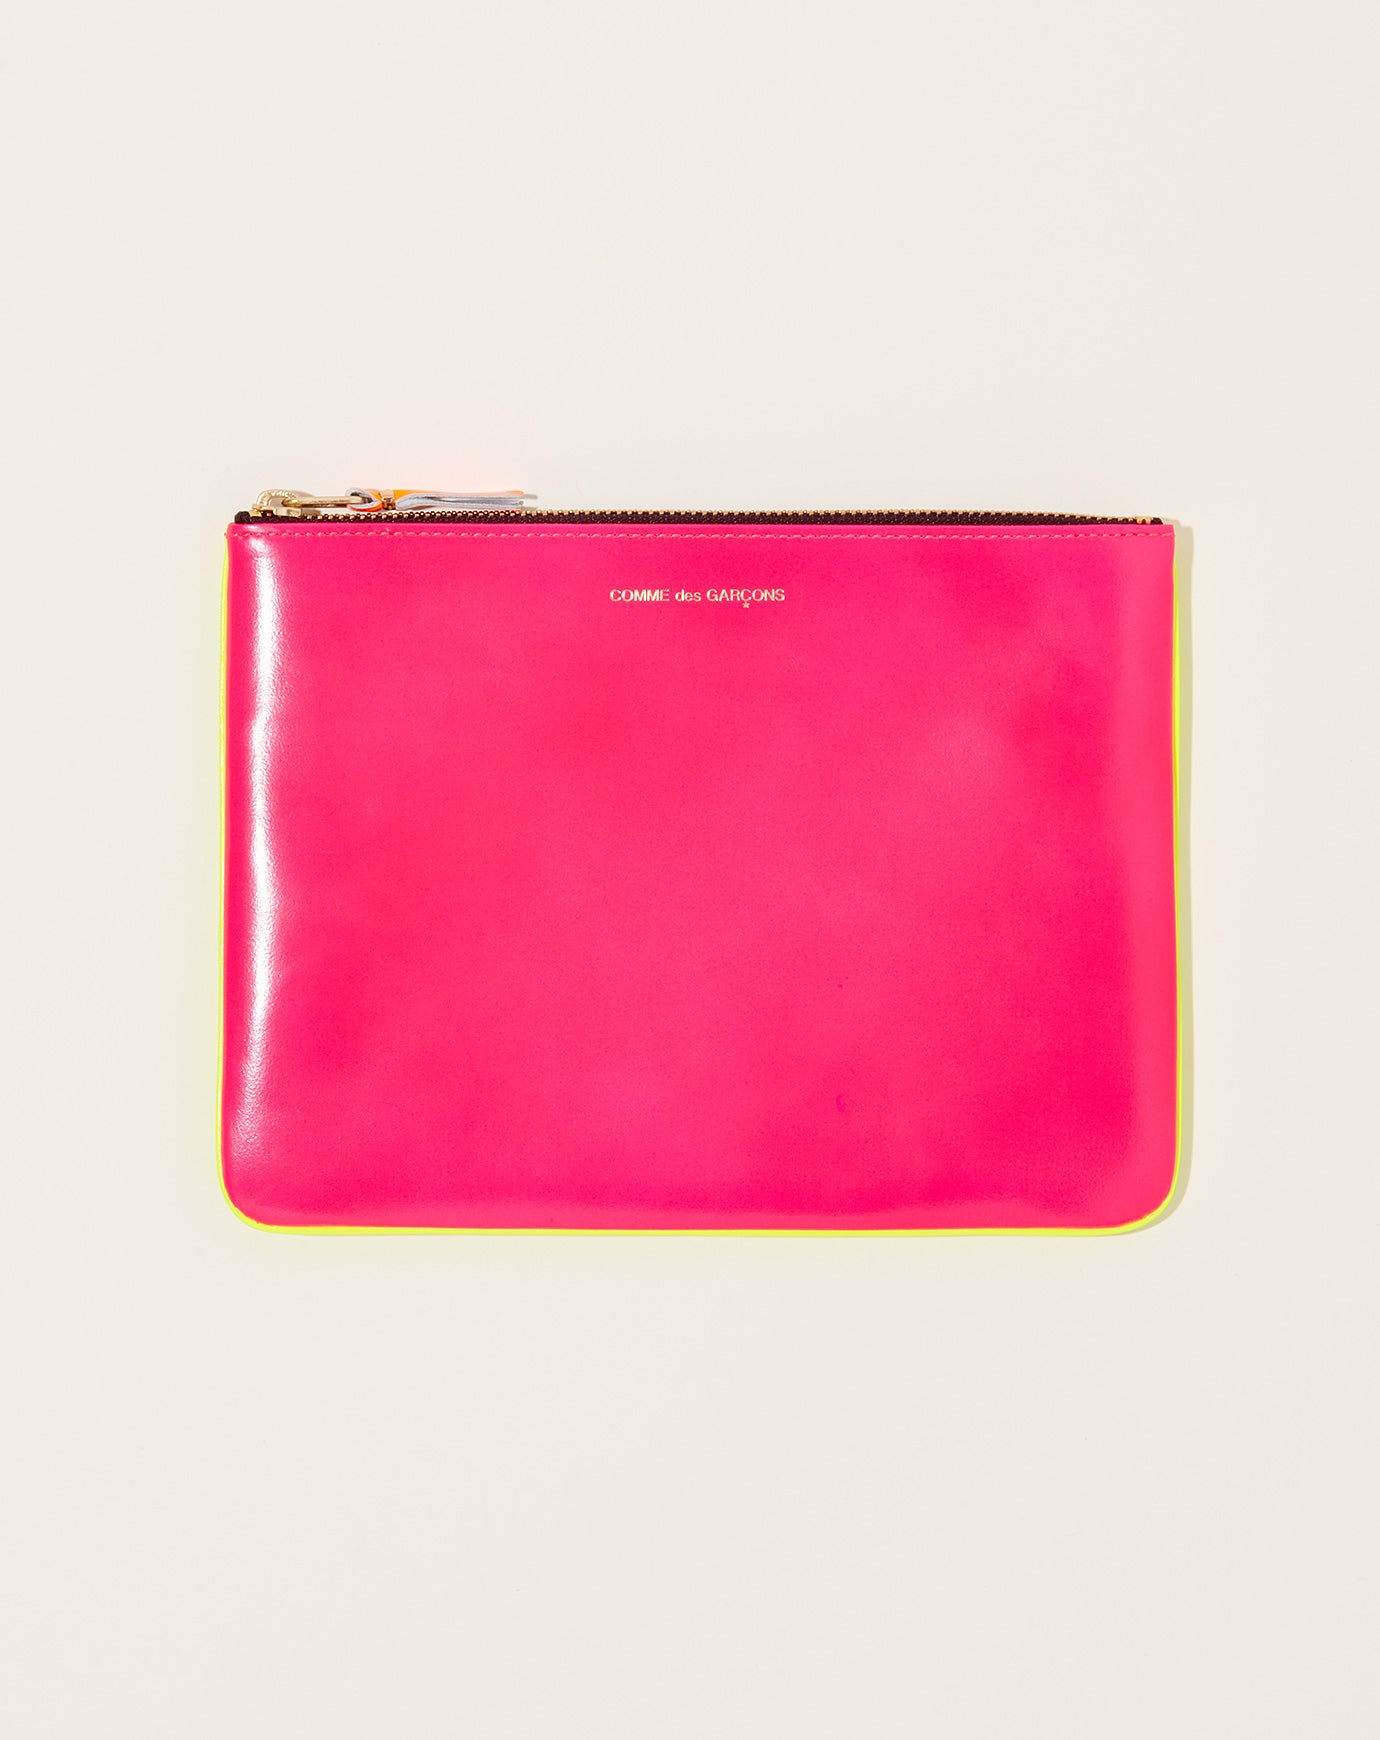 Comme des Garçons  Super Fluo Wallet Pouch in Pink and Yellow